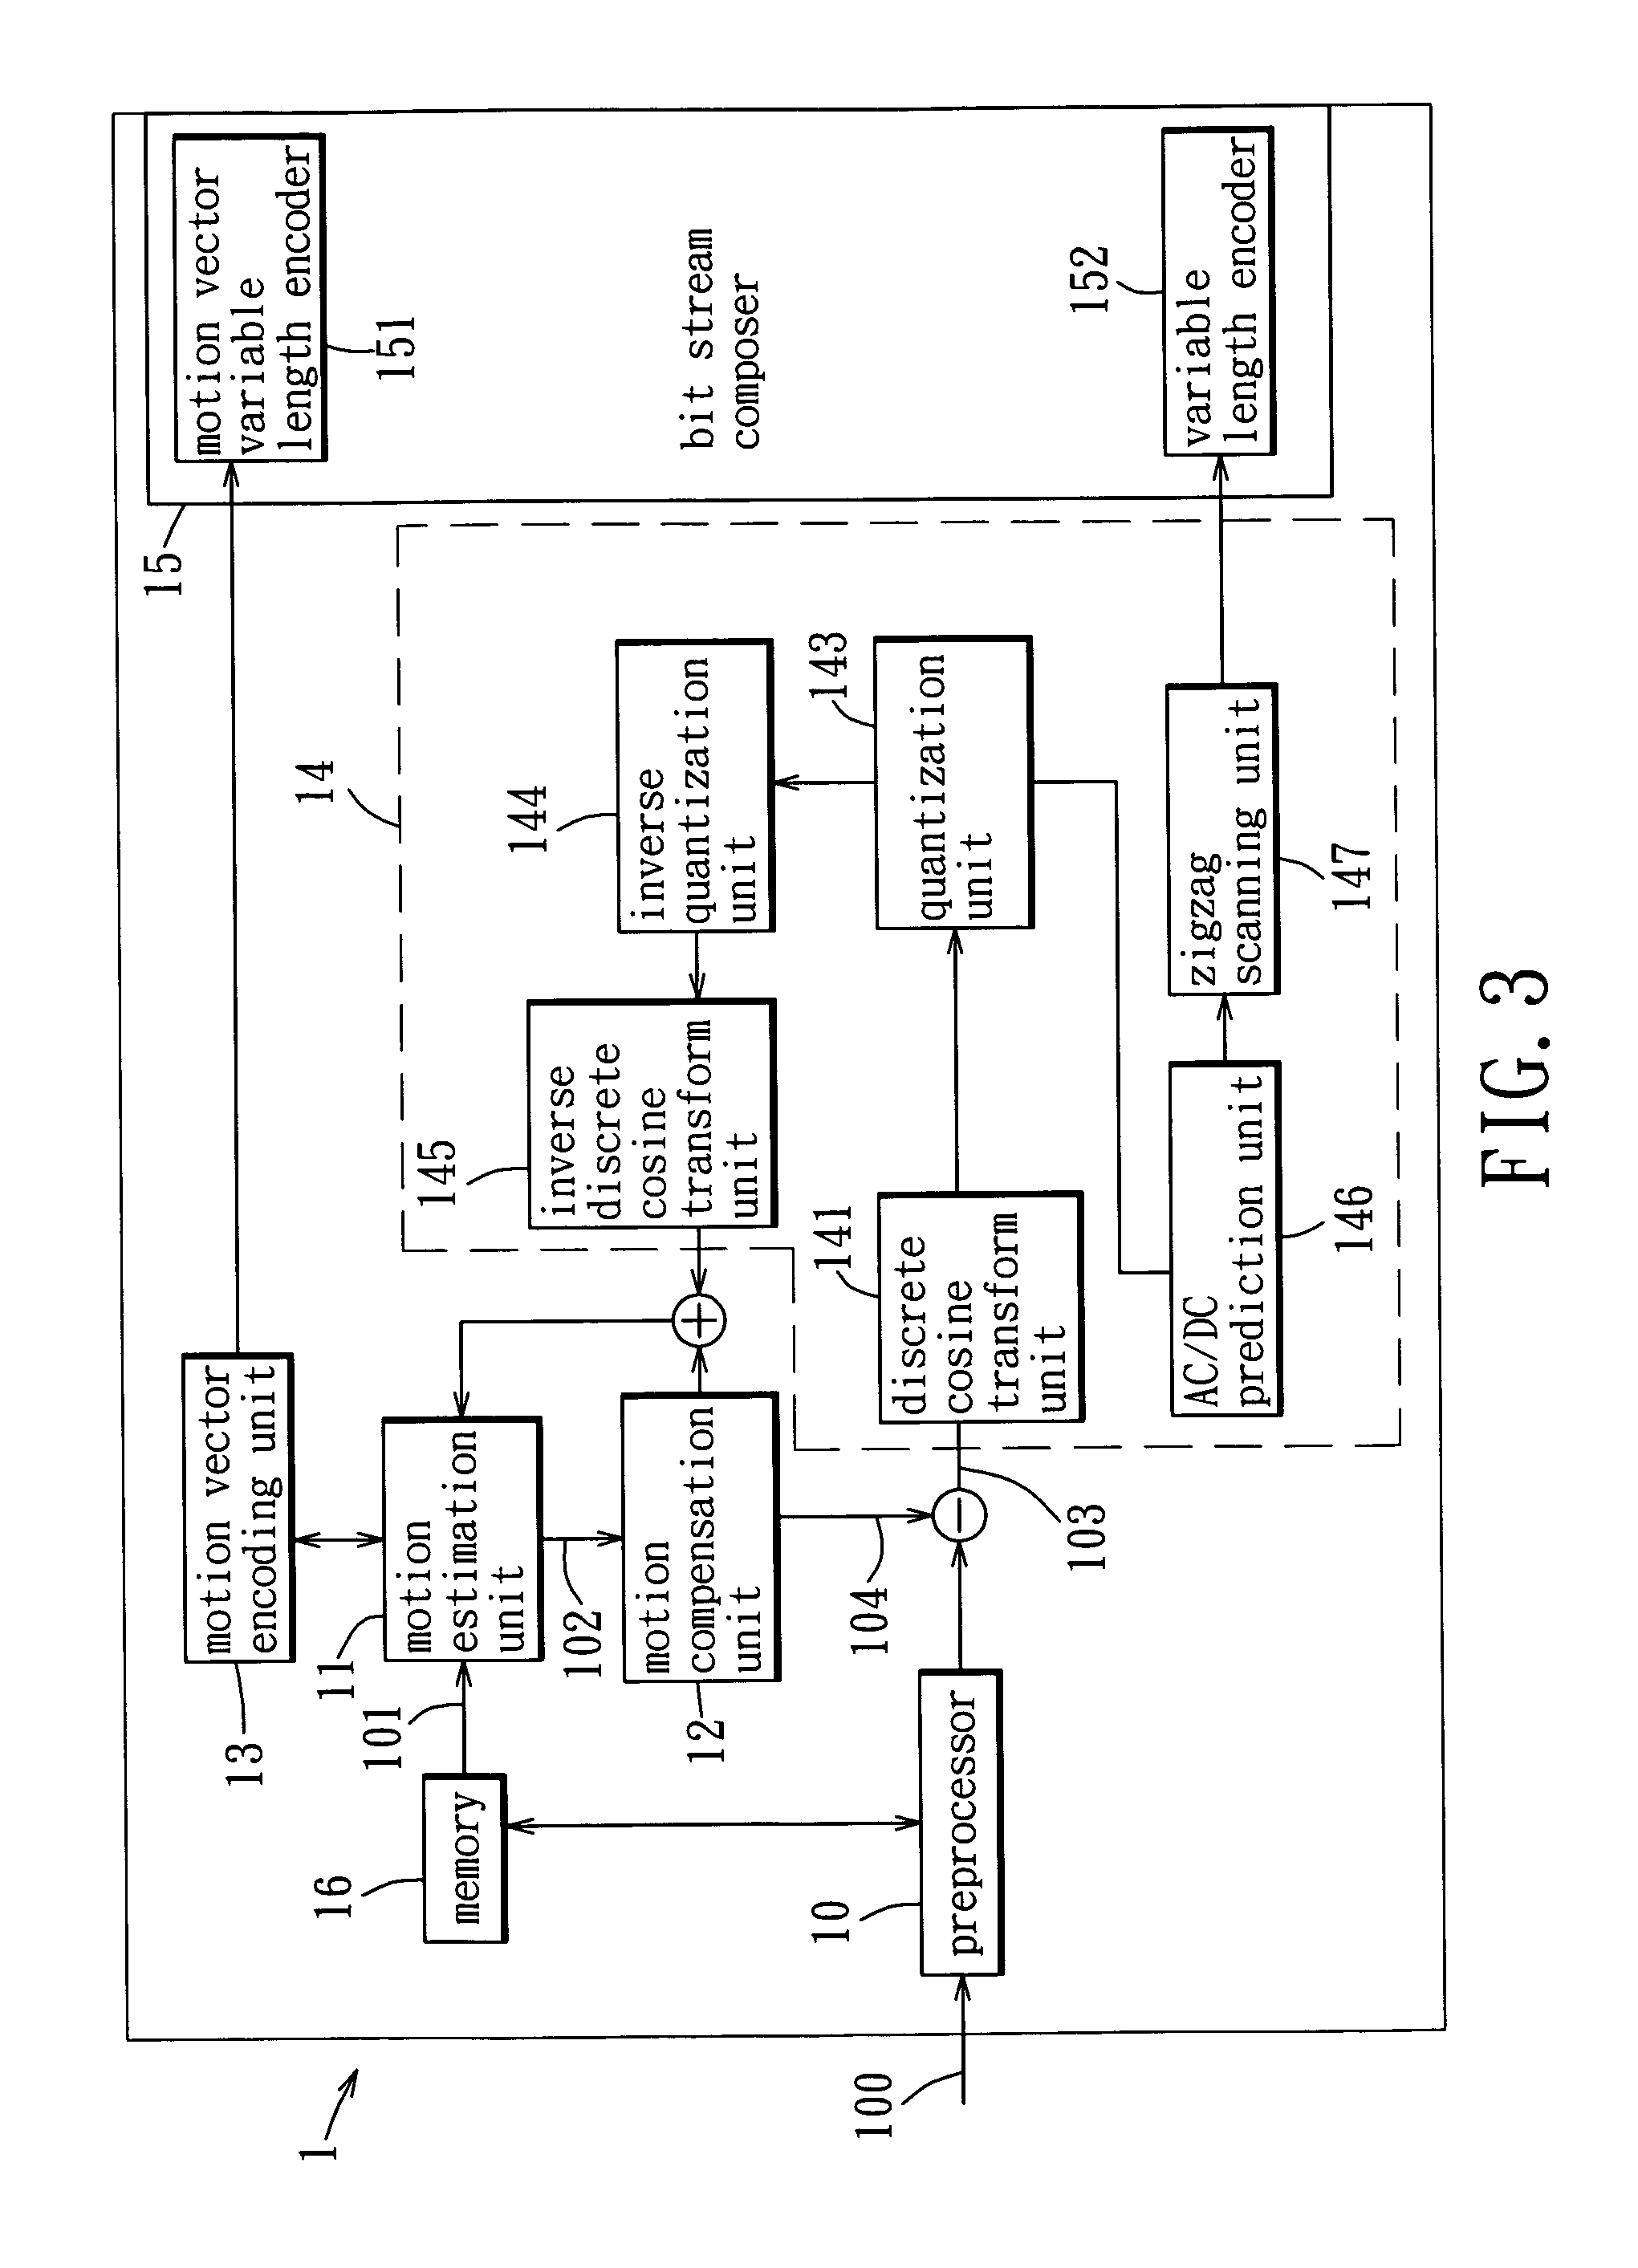 Motion estimation method utilizing modified rhombus pattern search for a succession of frames in digital coding system